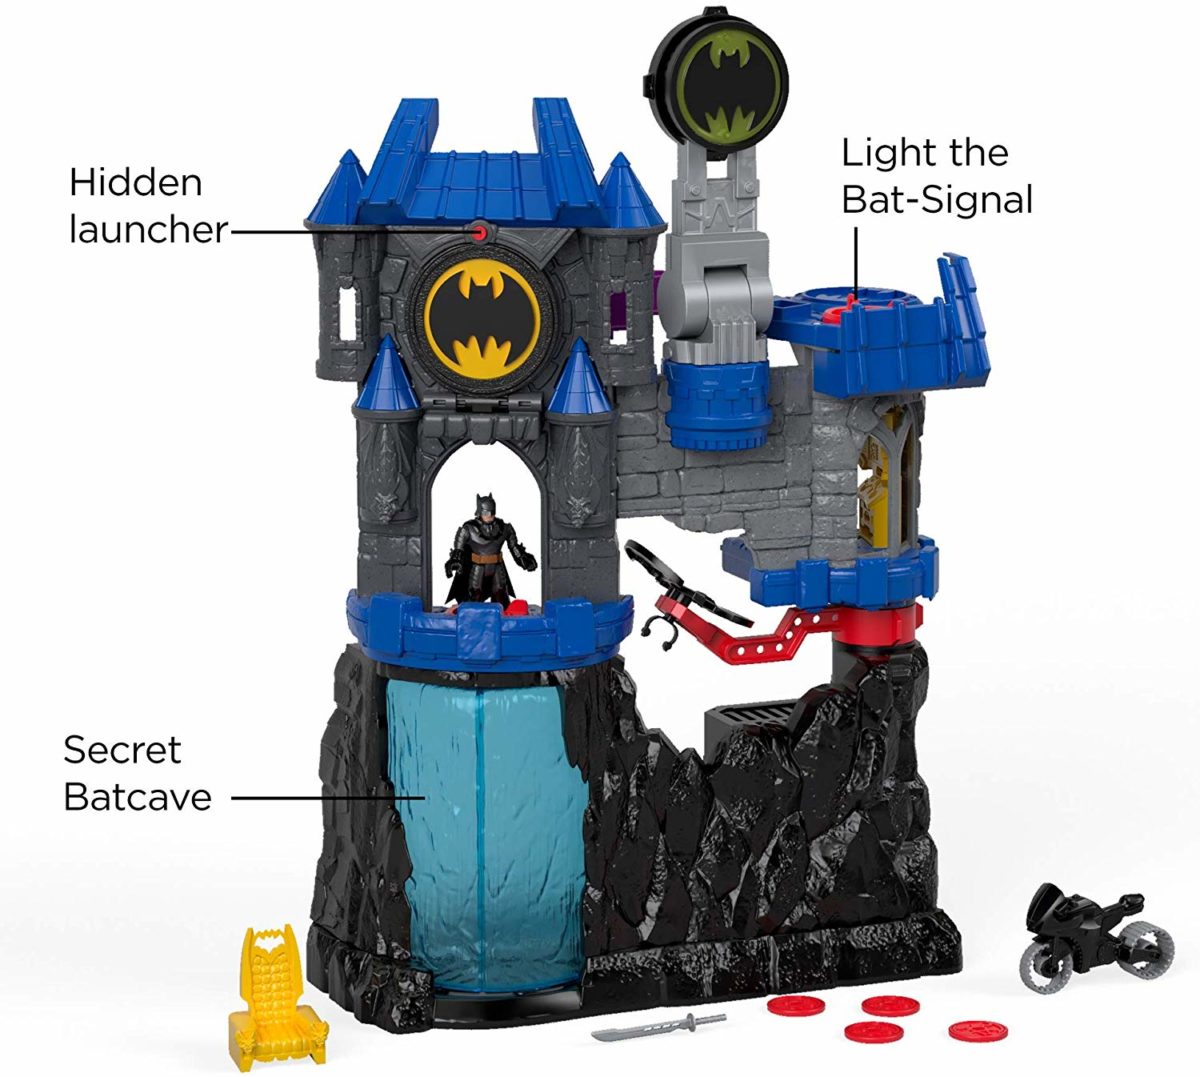 Fisher-Price Imaginext DC Super Friends, Wayne Manor Batcave - Top Toys and Gifts for Four Year Old Boys 2